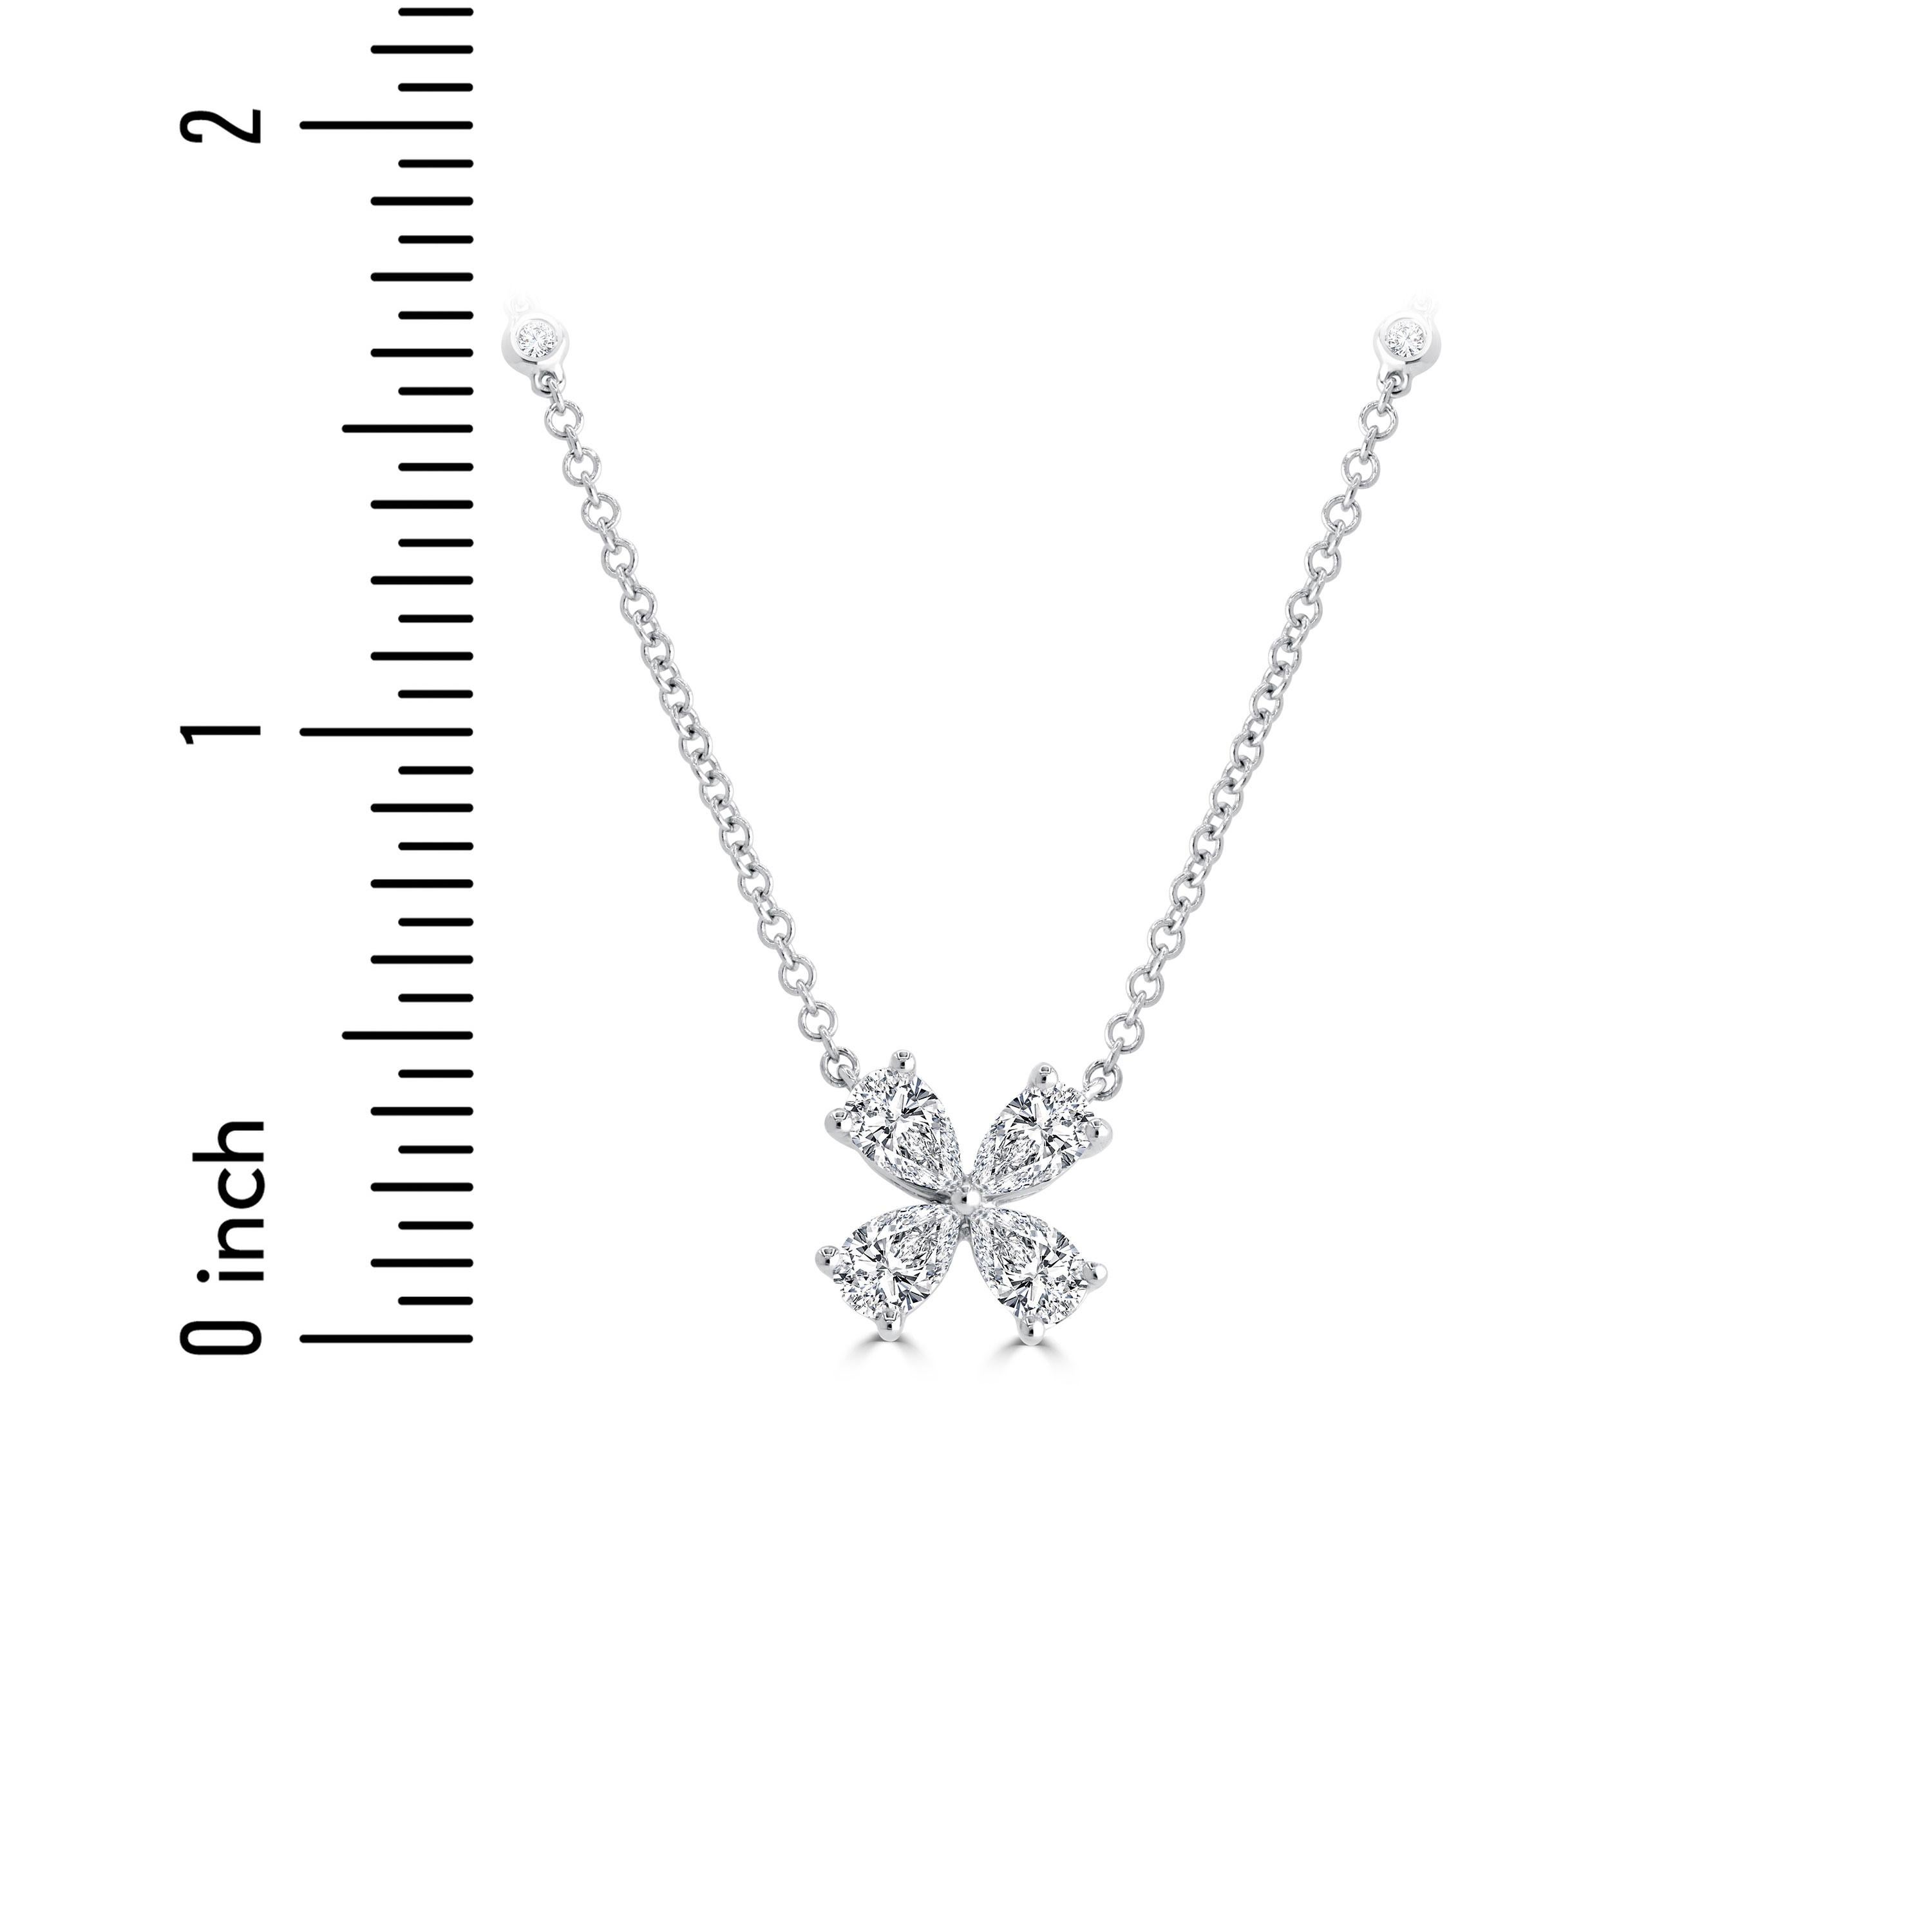 1.34 Carat Pear Shape Natural Diamond Necklace in 18k White Gold ref2083 For Sale 1